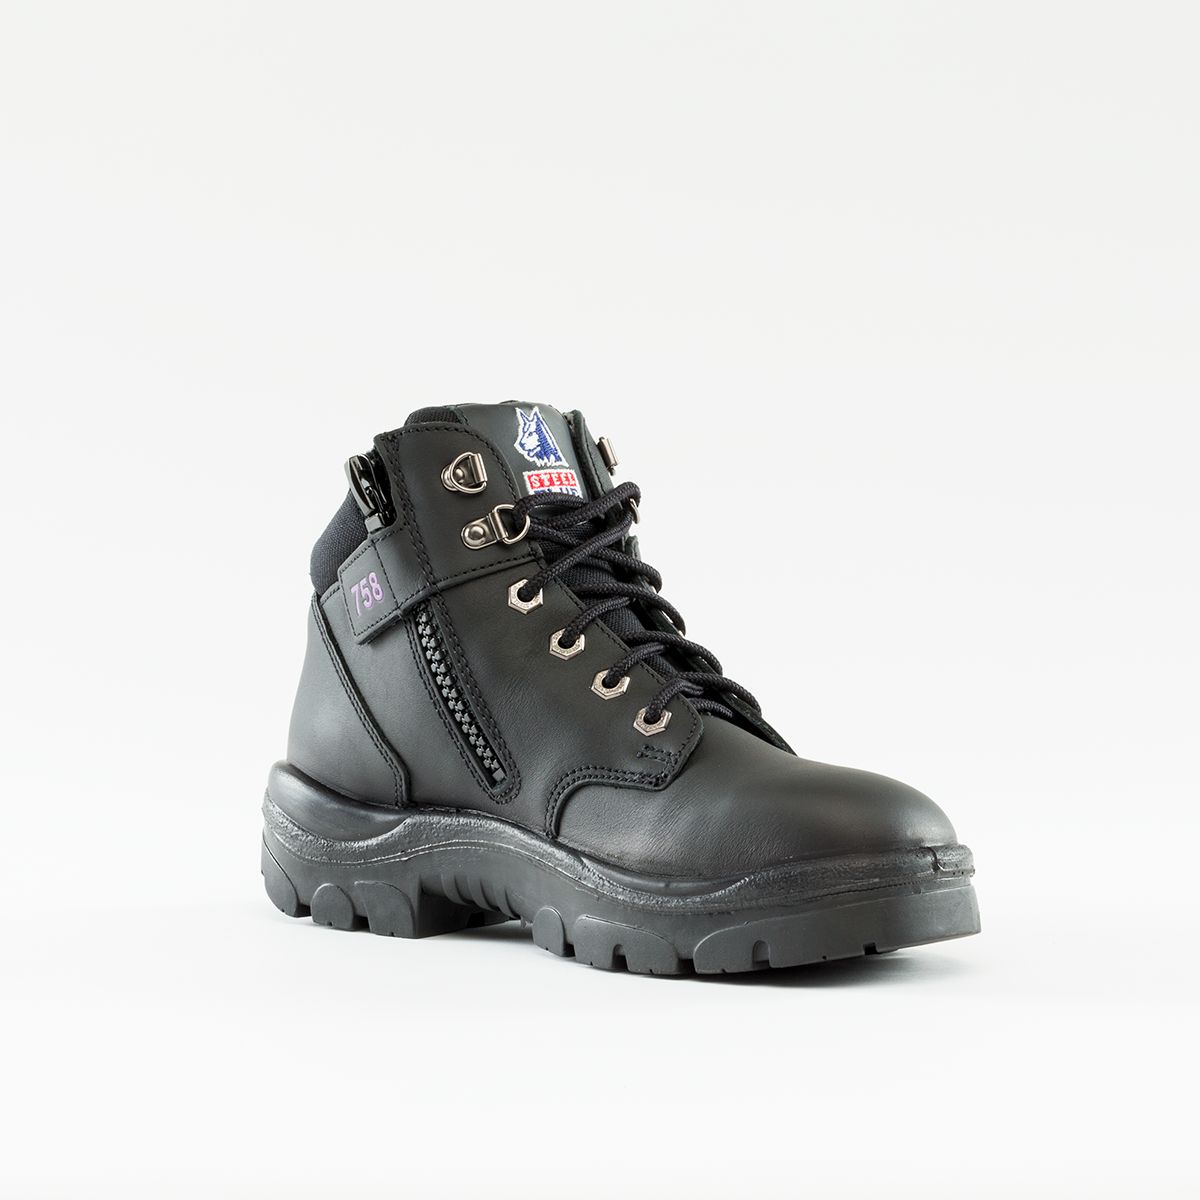 SAFETY BOOT PARKES LADIES 10 - BLACK ZIP SIDED